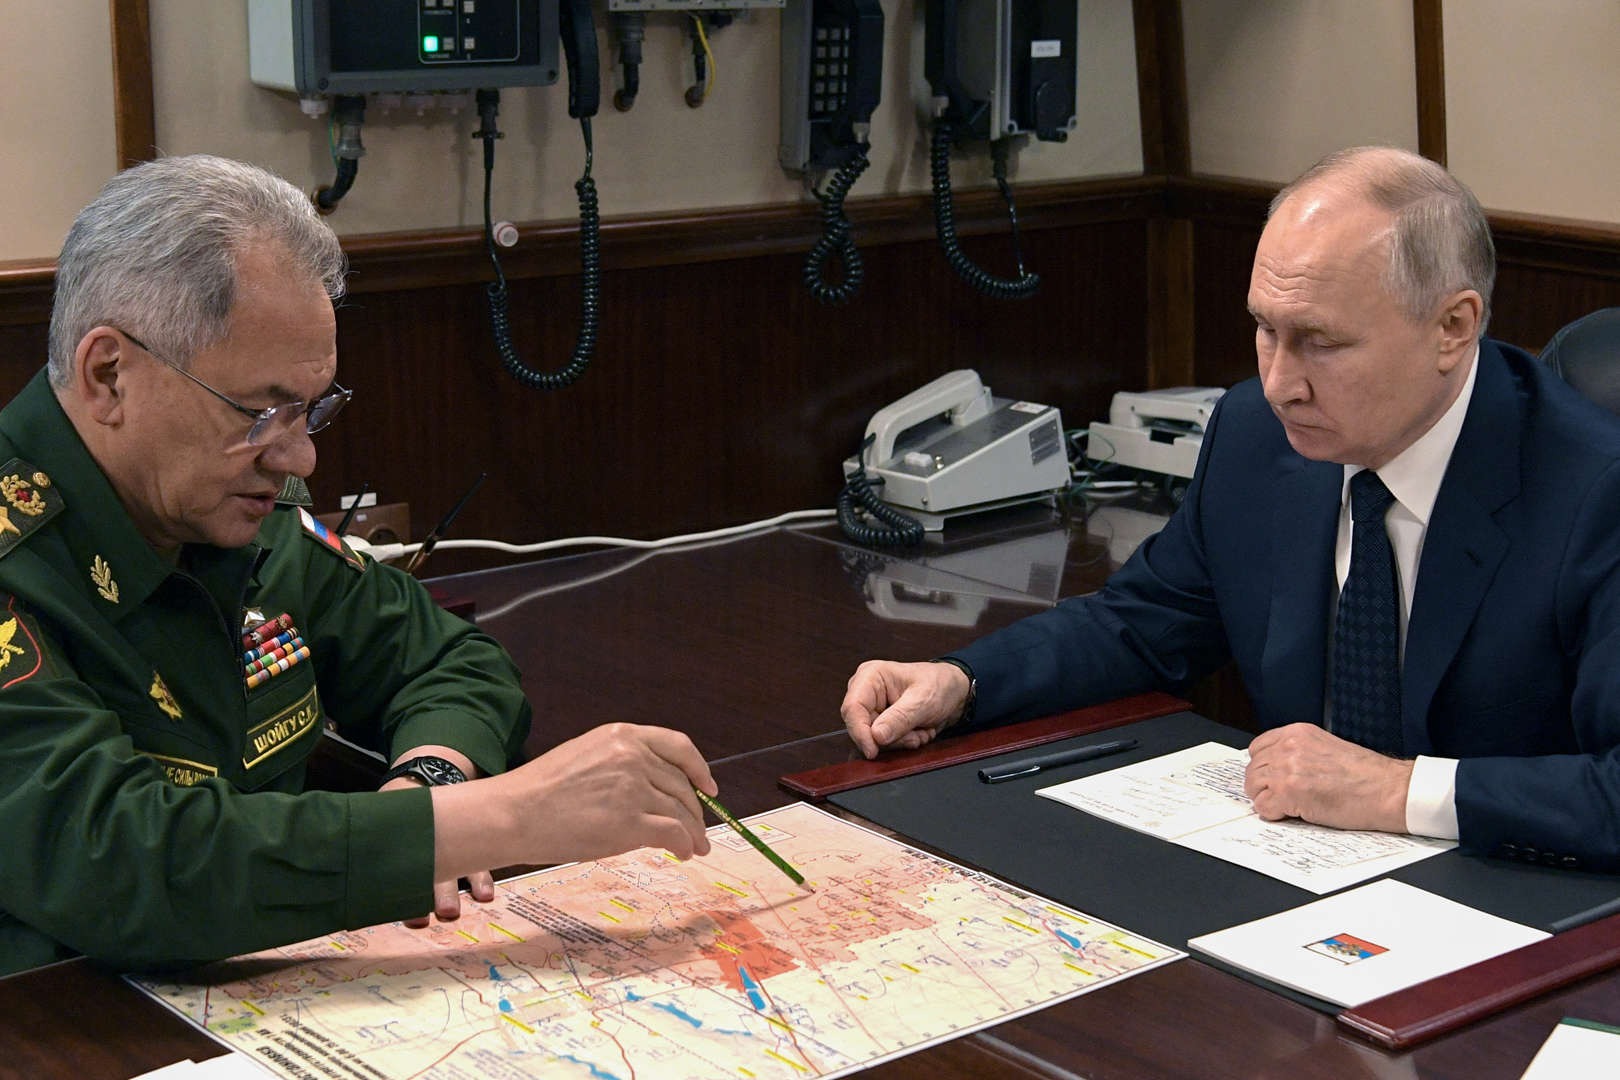 alt=Two military men discussing strategies over maps at a table.